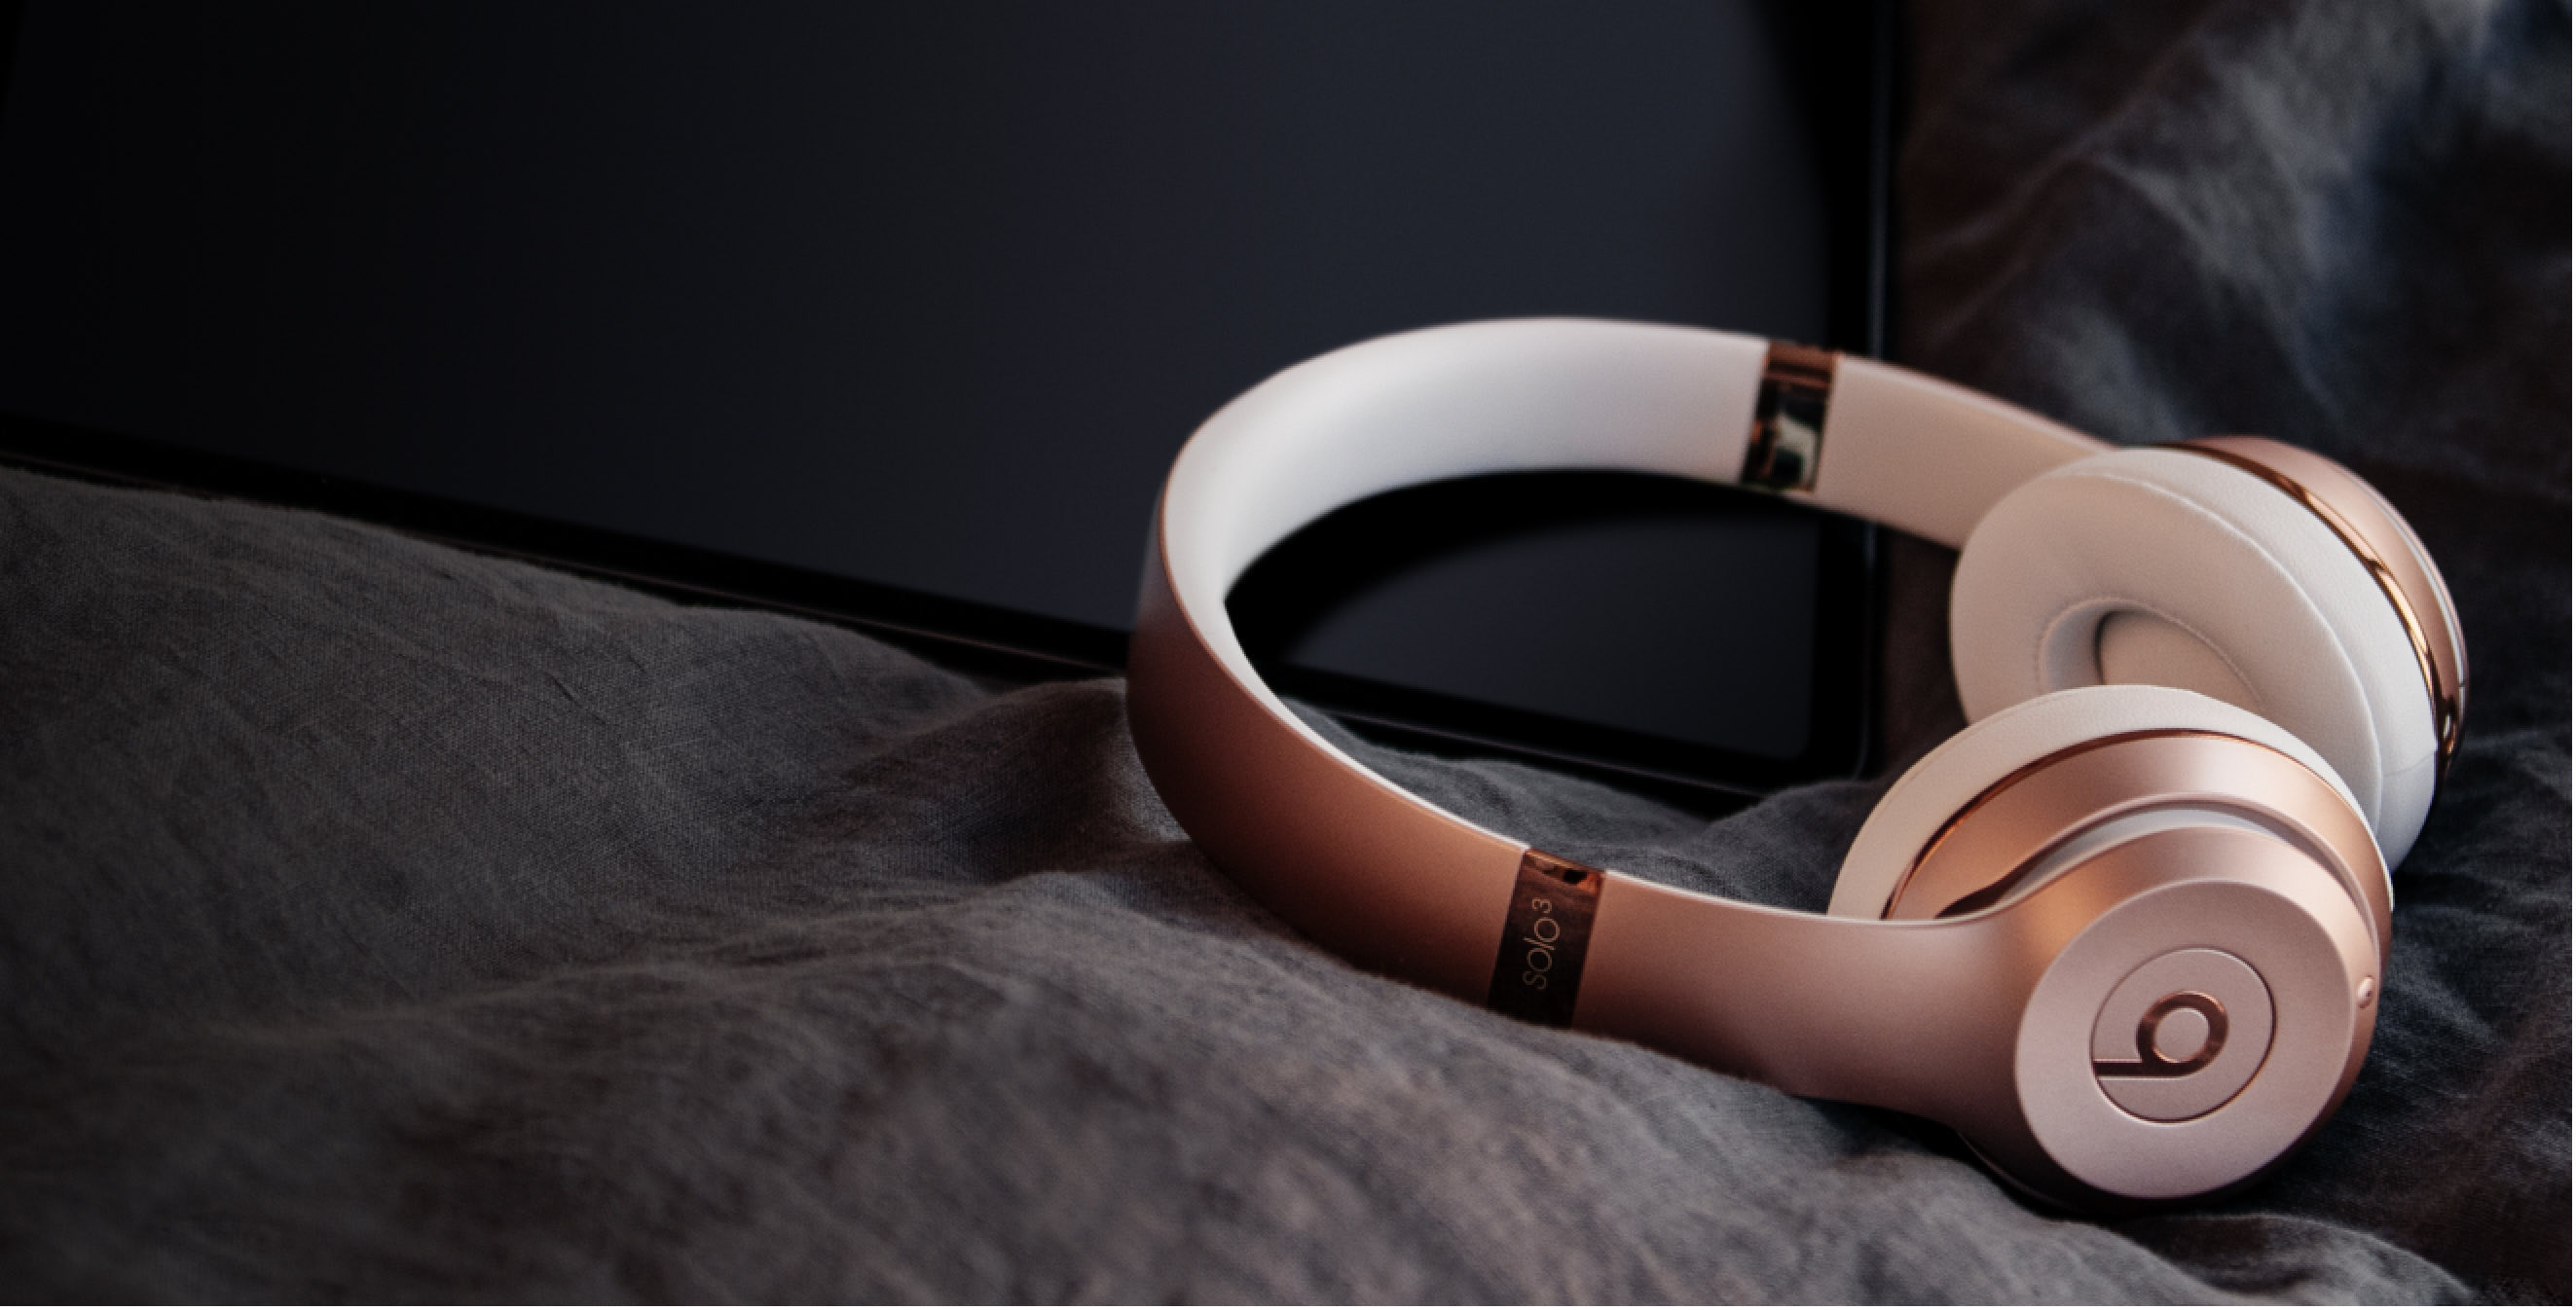 How To Turn Off Noise Cancellation On Beats Solo 3